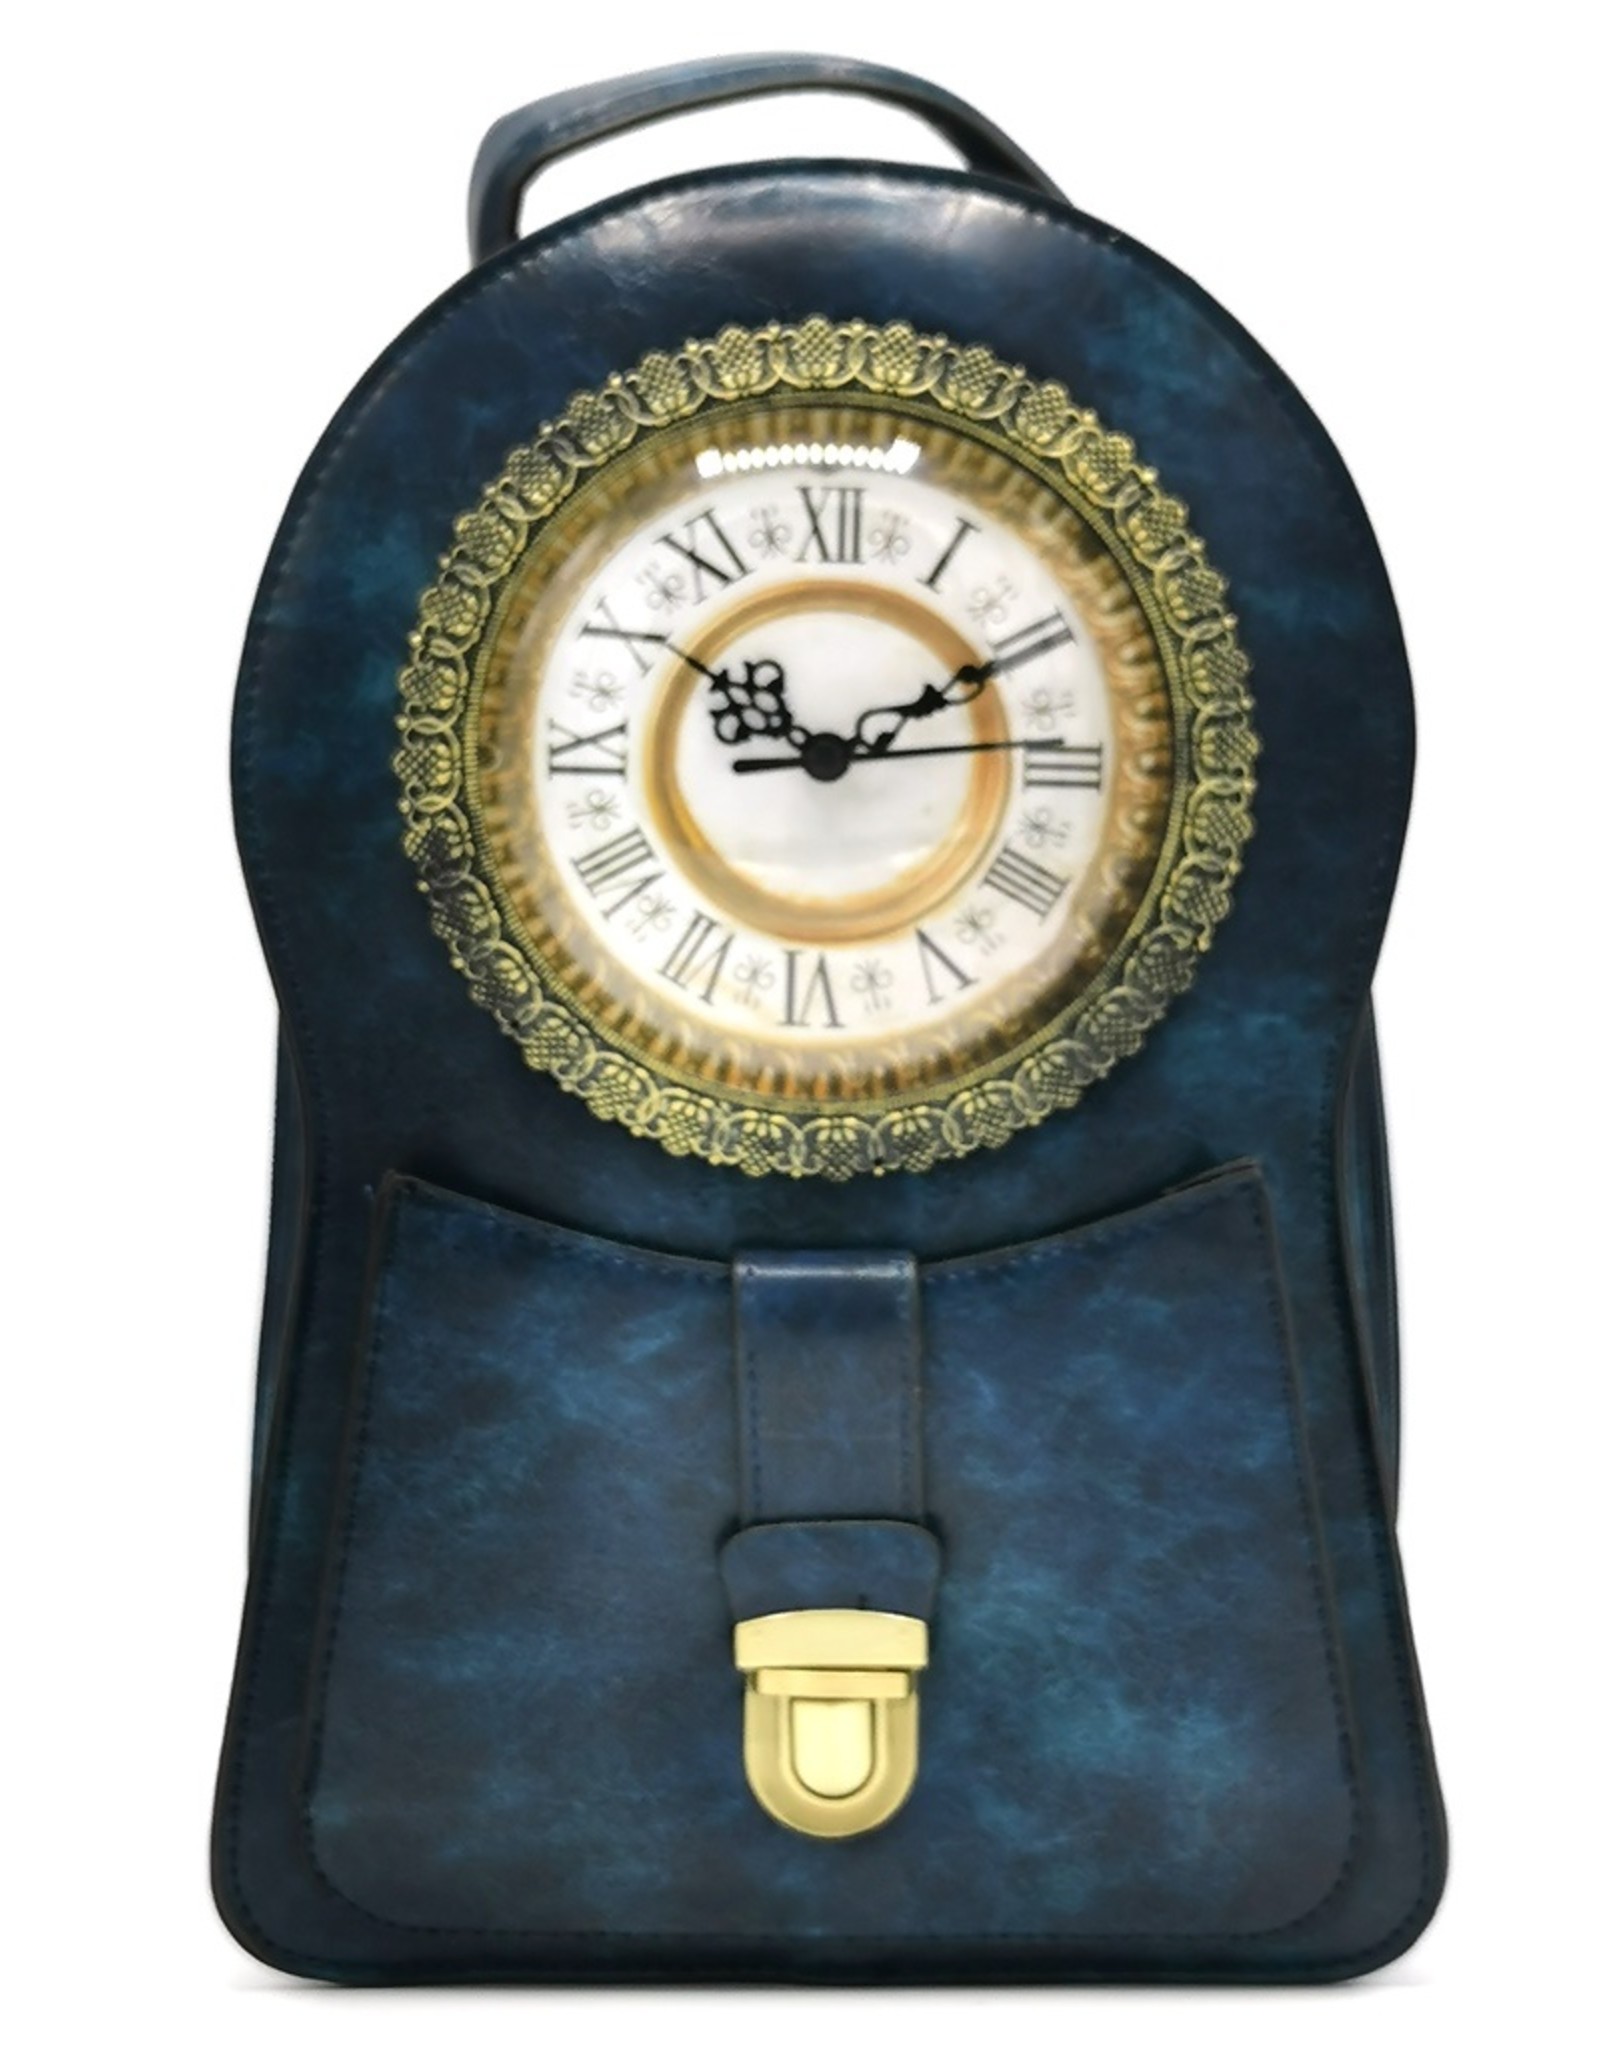 Magic Bags Gothic bags Steampunk bags - Steampunk Backpack - Shoulder bag with Real Clock